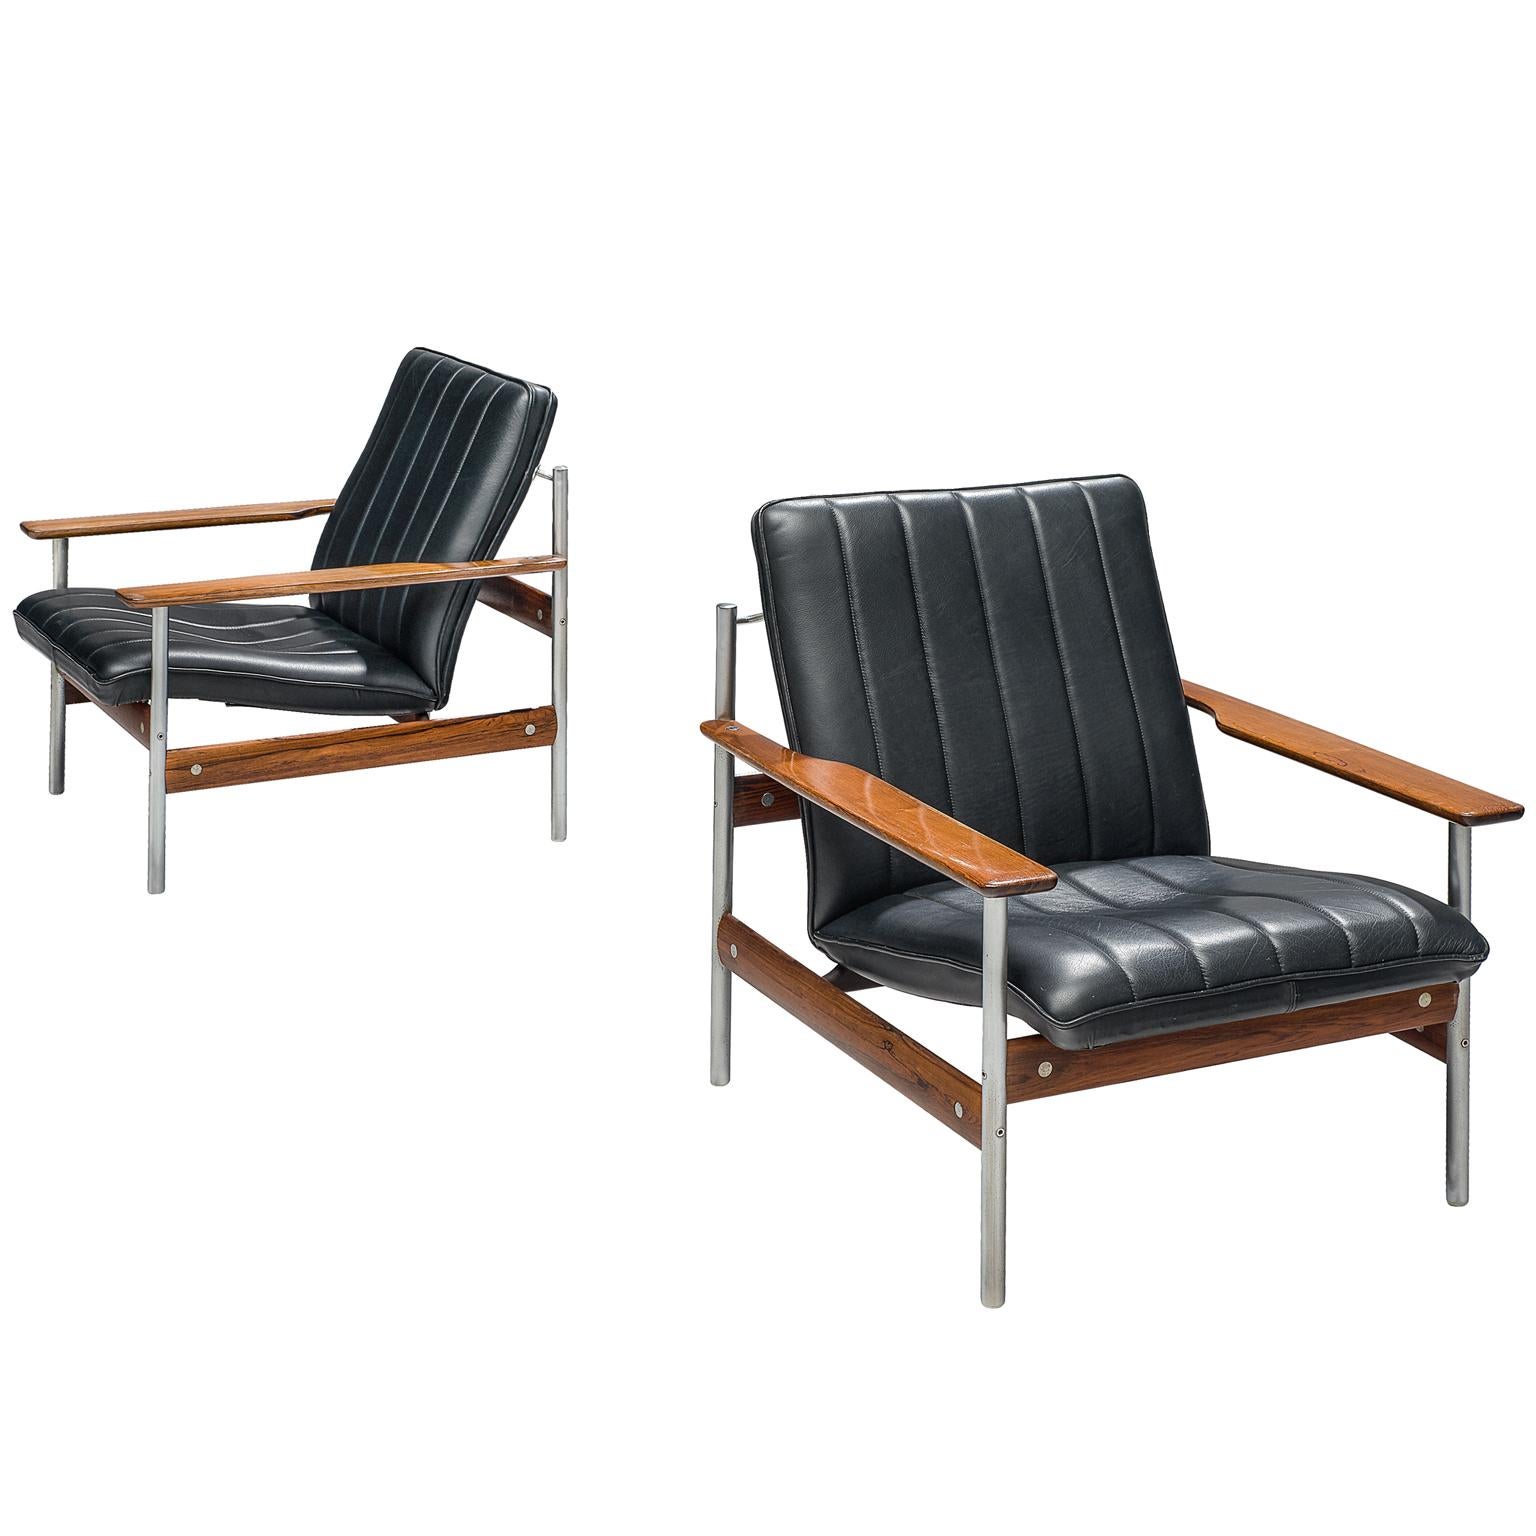 Norwegian Lounge Chairs by Sven Ivar Dysthe in Original Black Leather